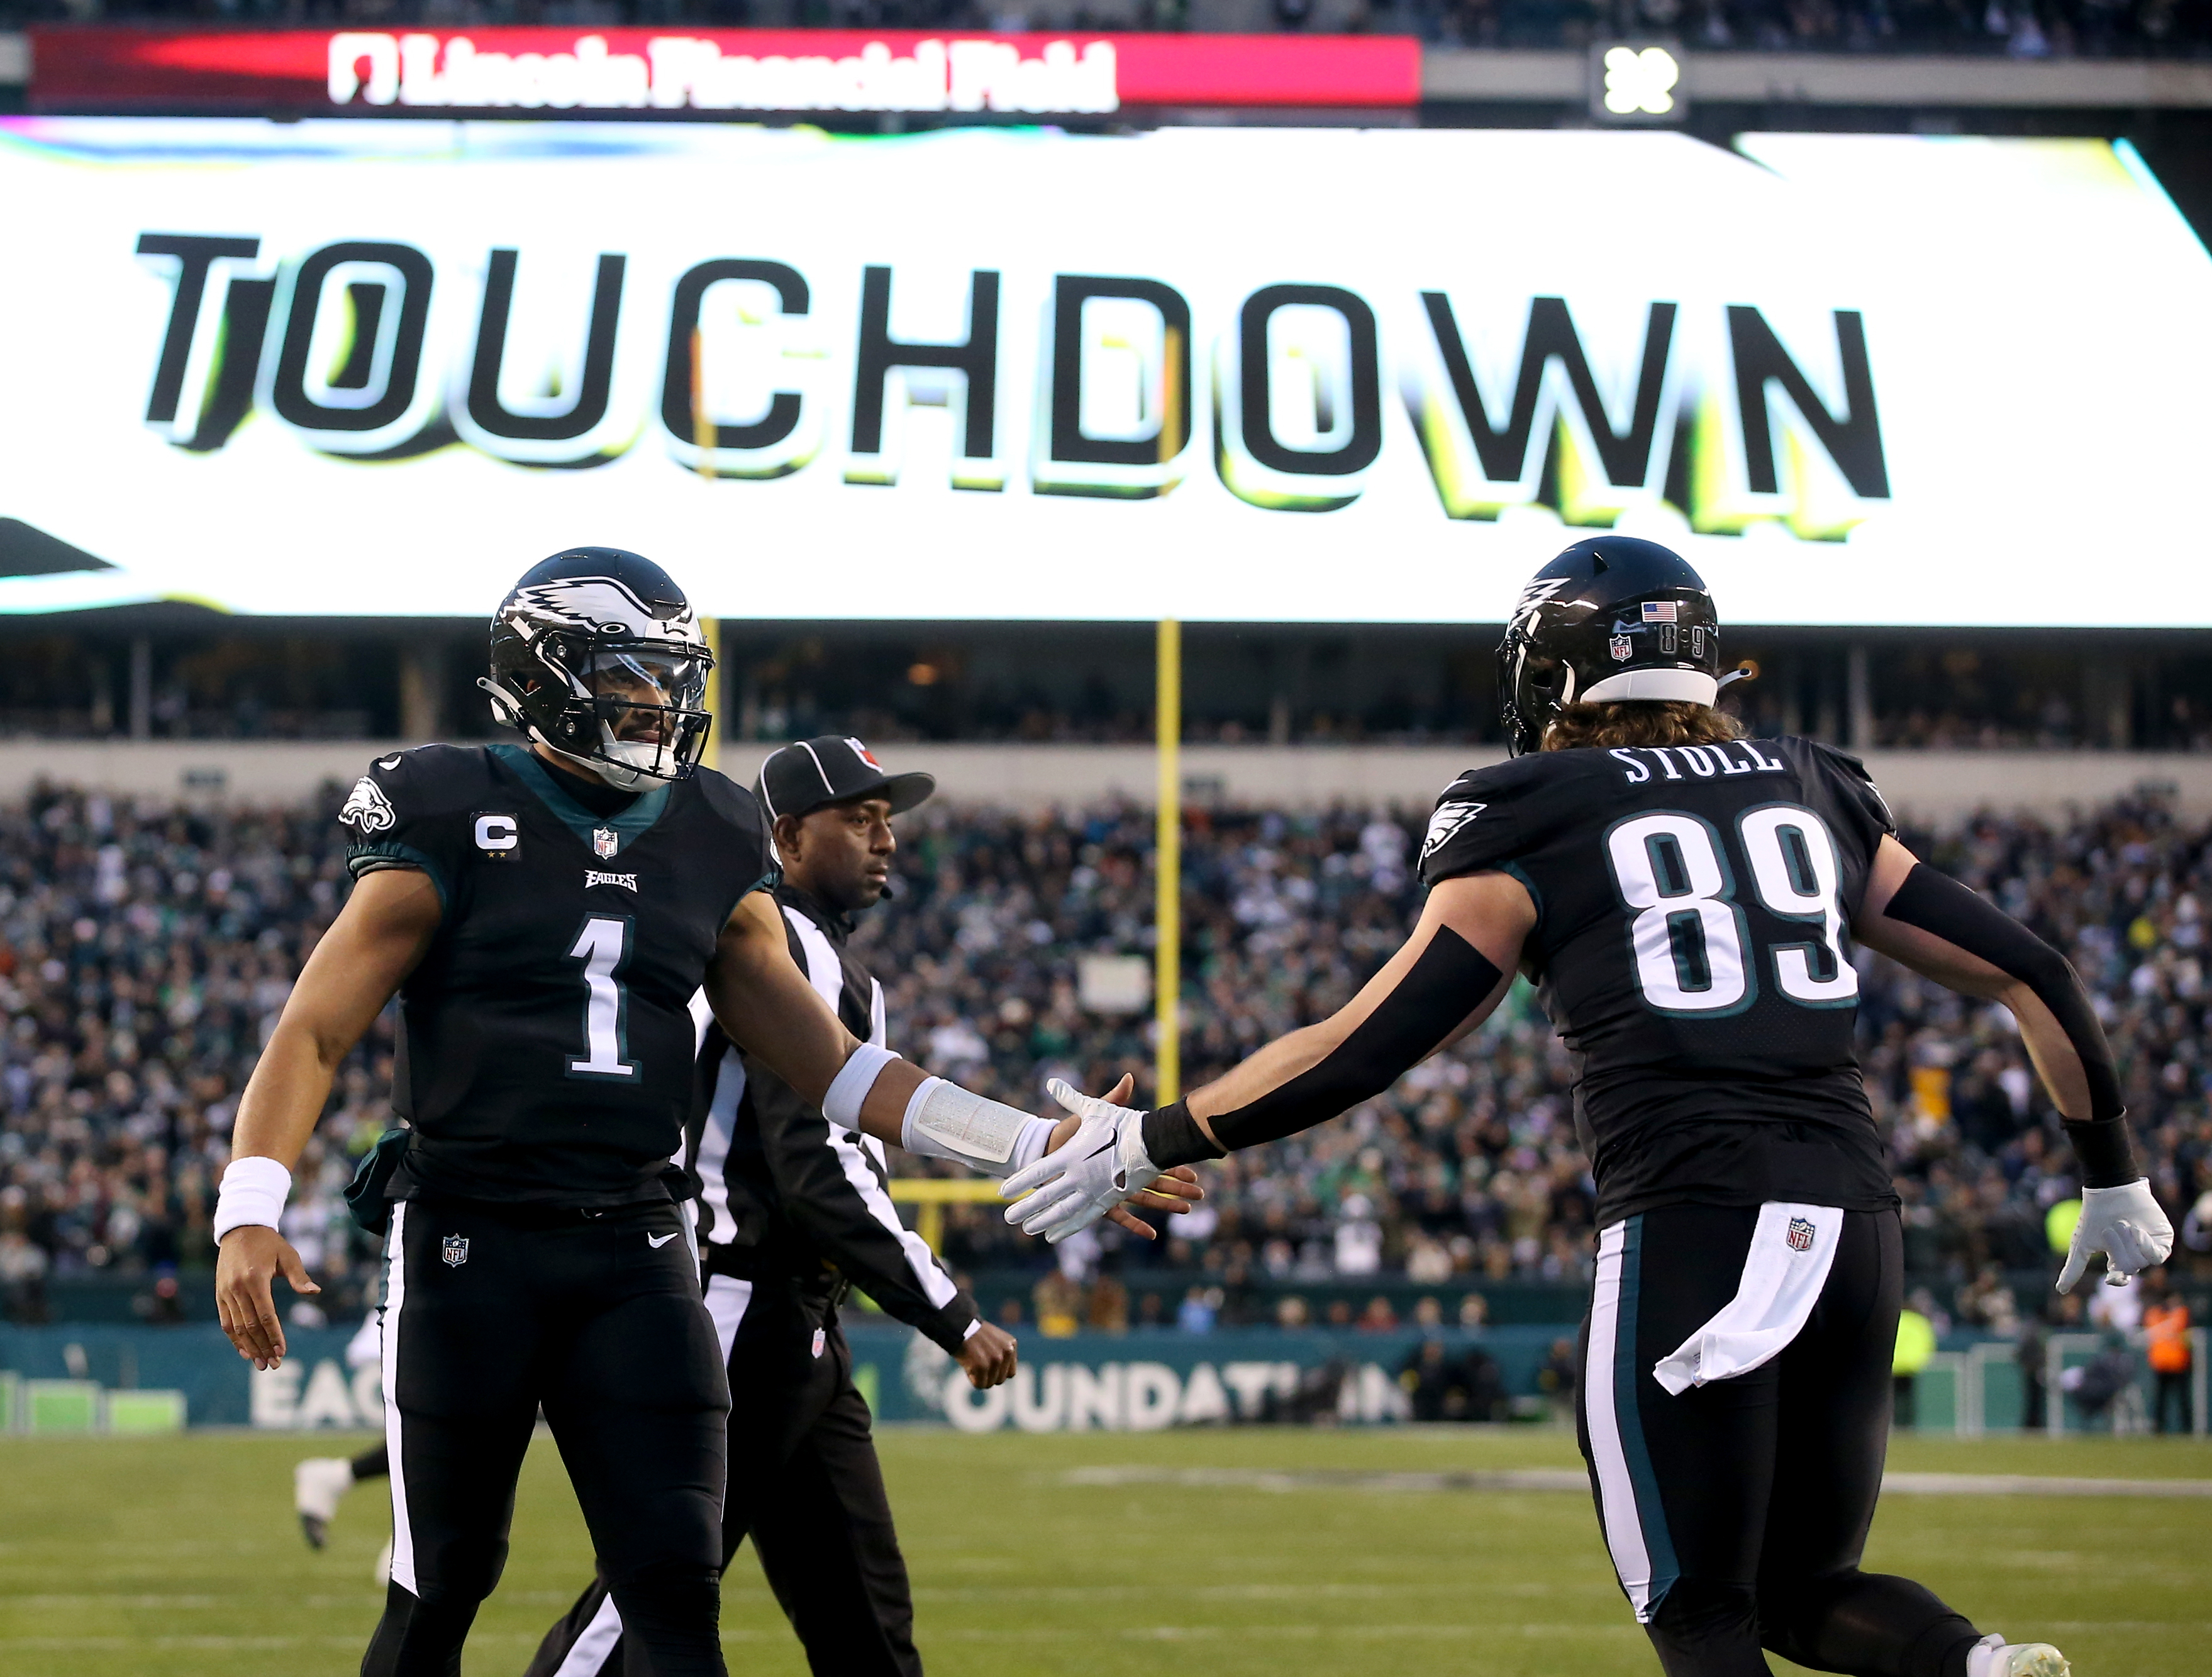 Eagles clinch the NFC East after 22-16 win over the Giants in Week 18